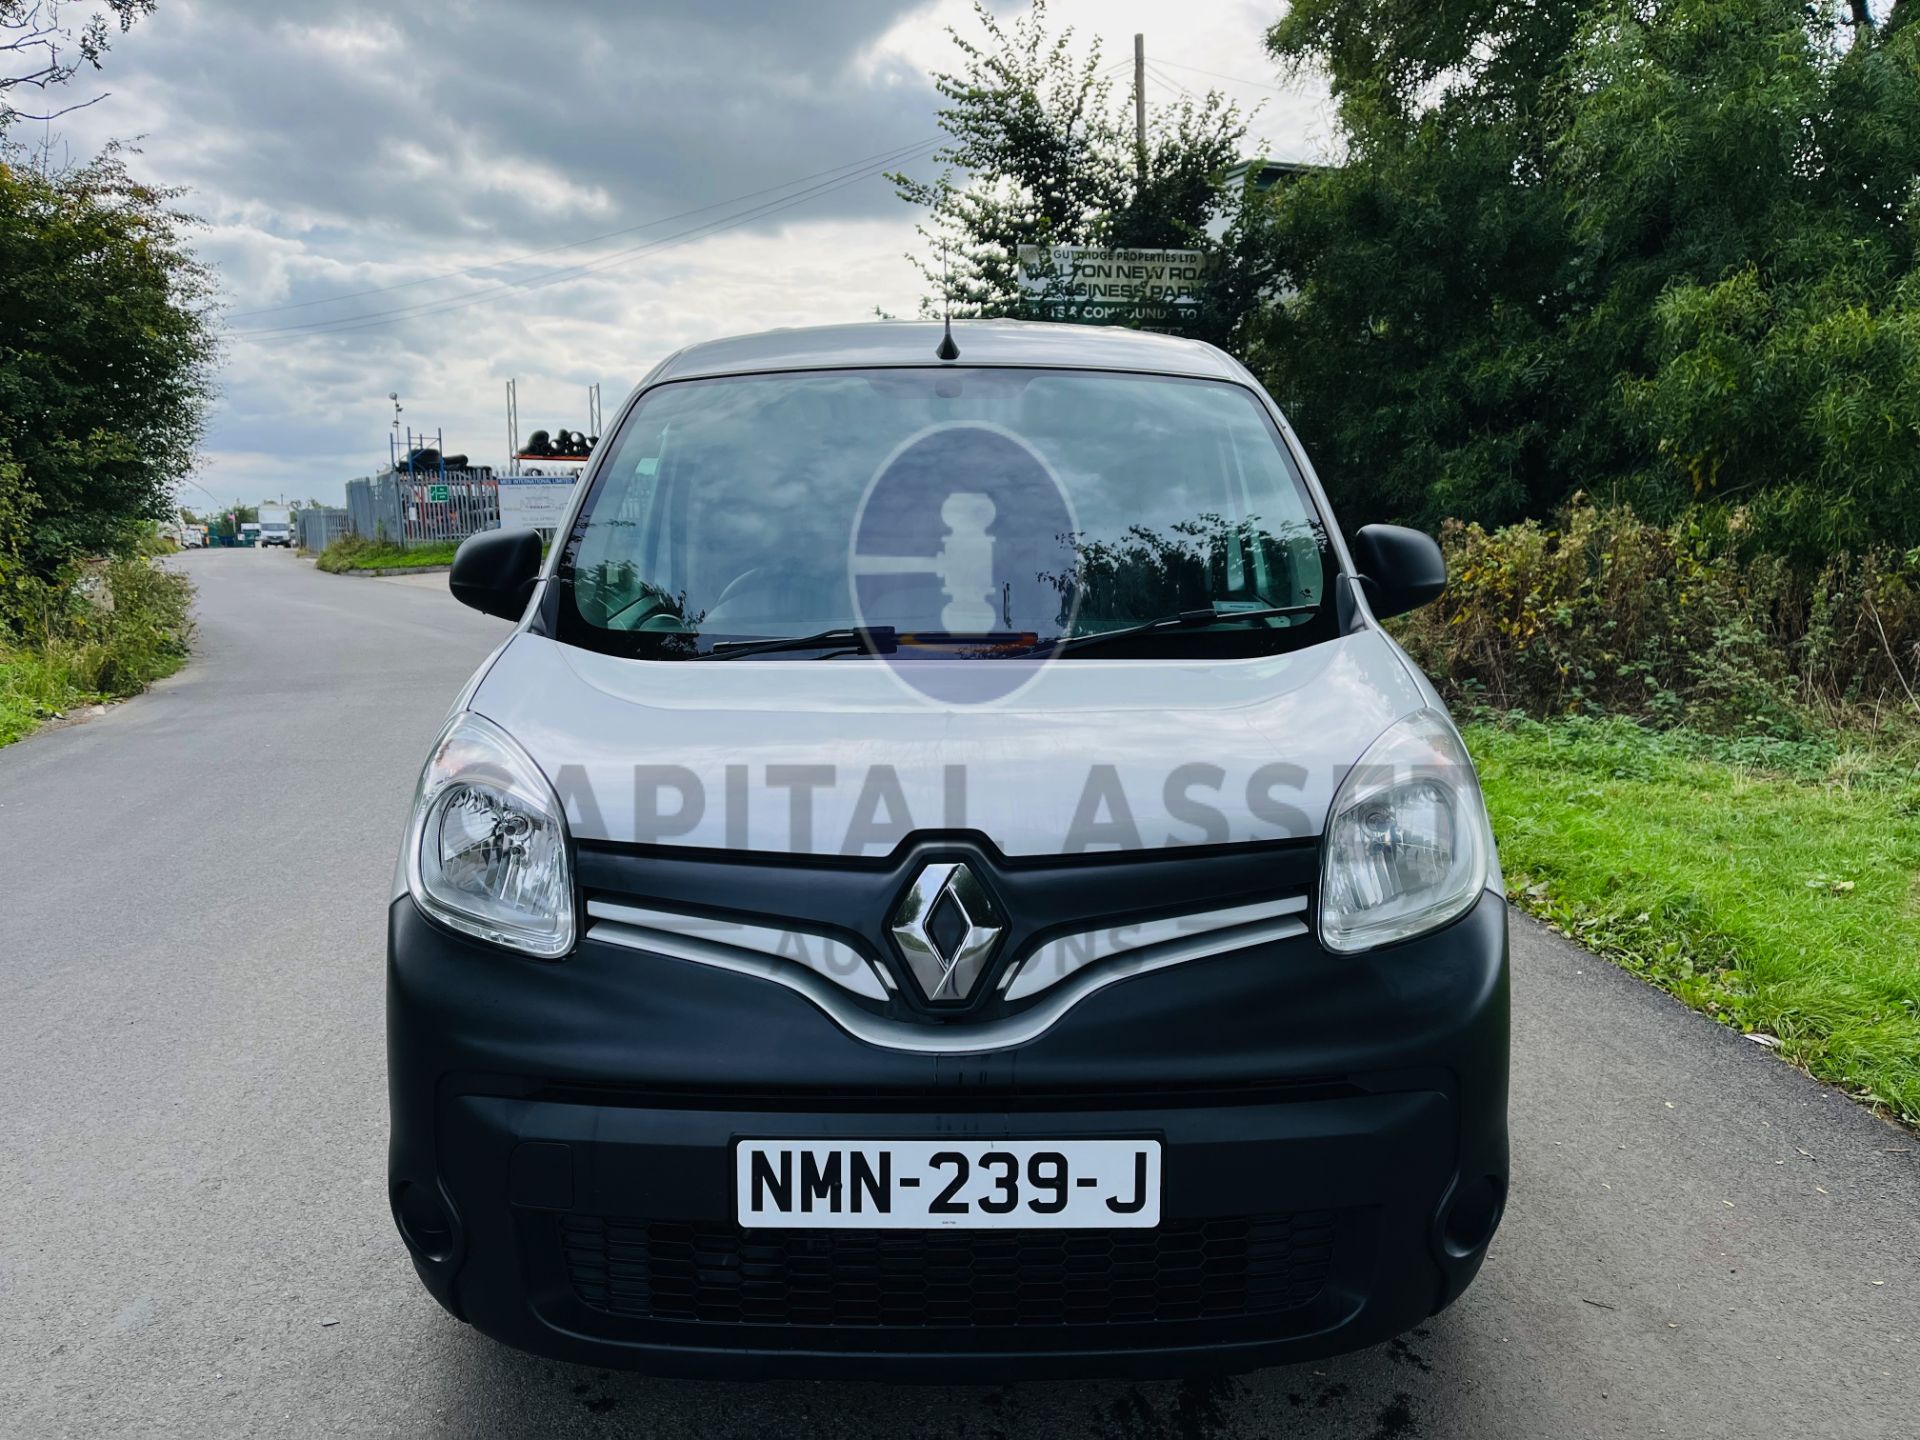 RENAULT KANGOO 1.5DCI "BUSINESS EDITION" (2018) EURO 6 - 6 SPEED - AIR CON - STOP / START -ELEC PACK - Image 4 of 22